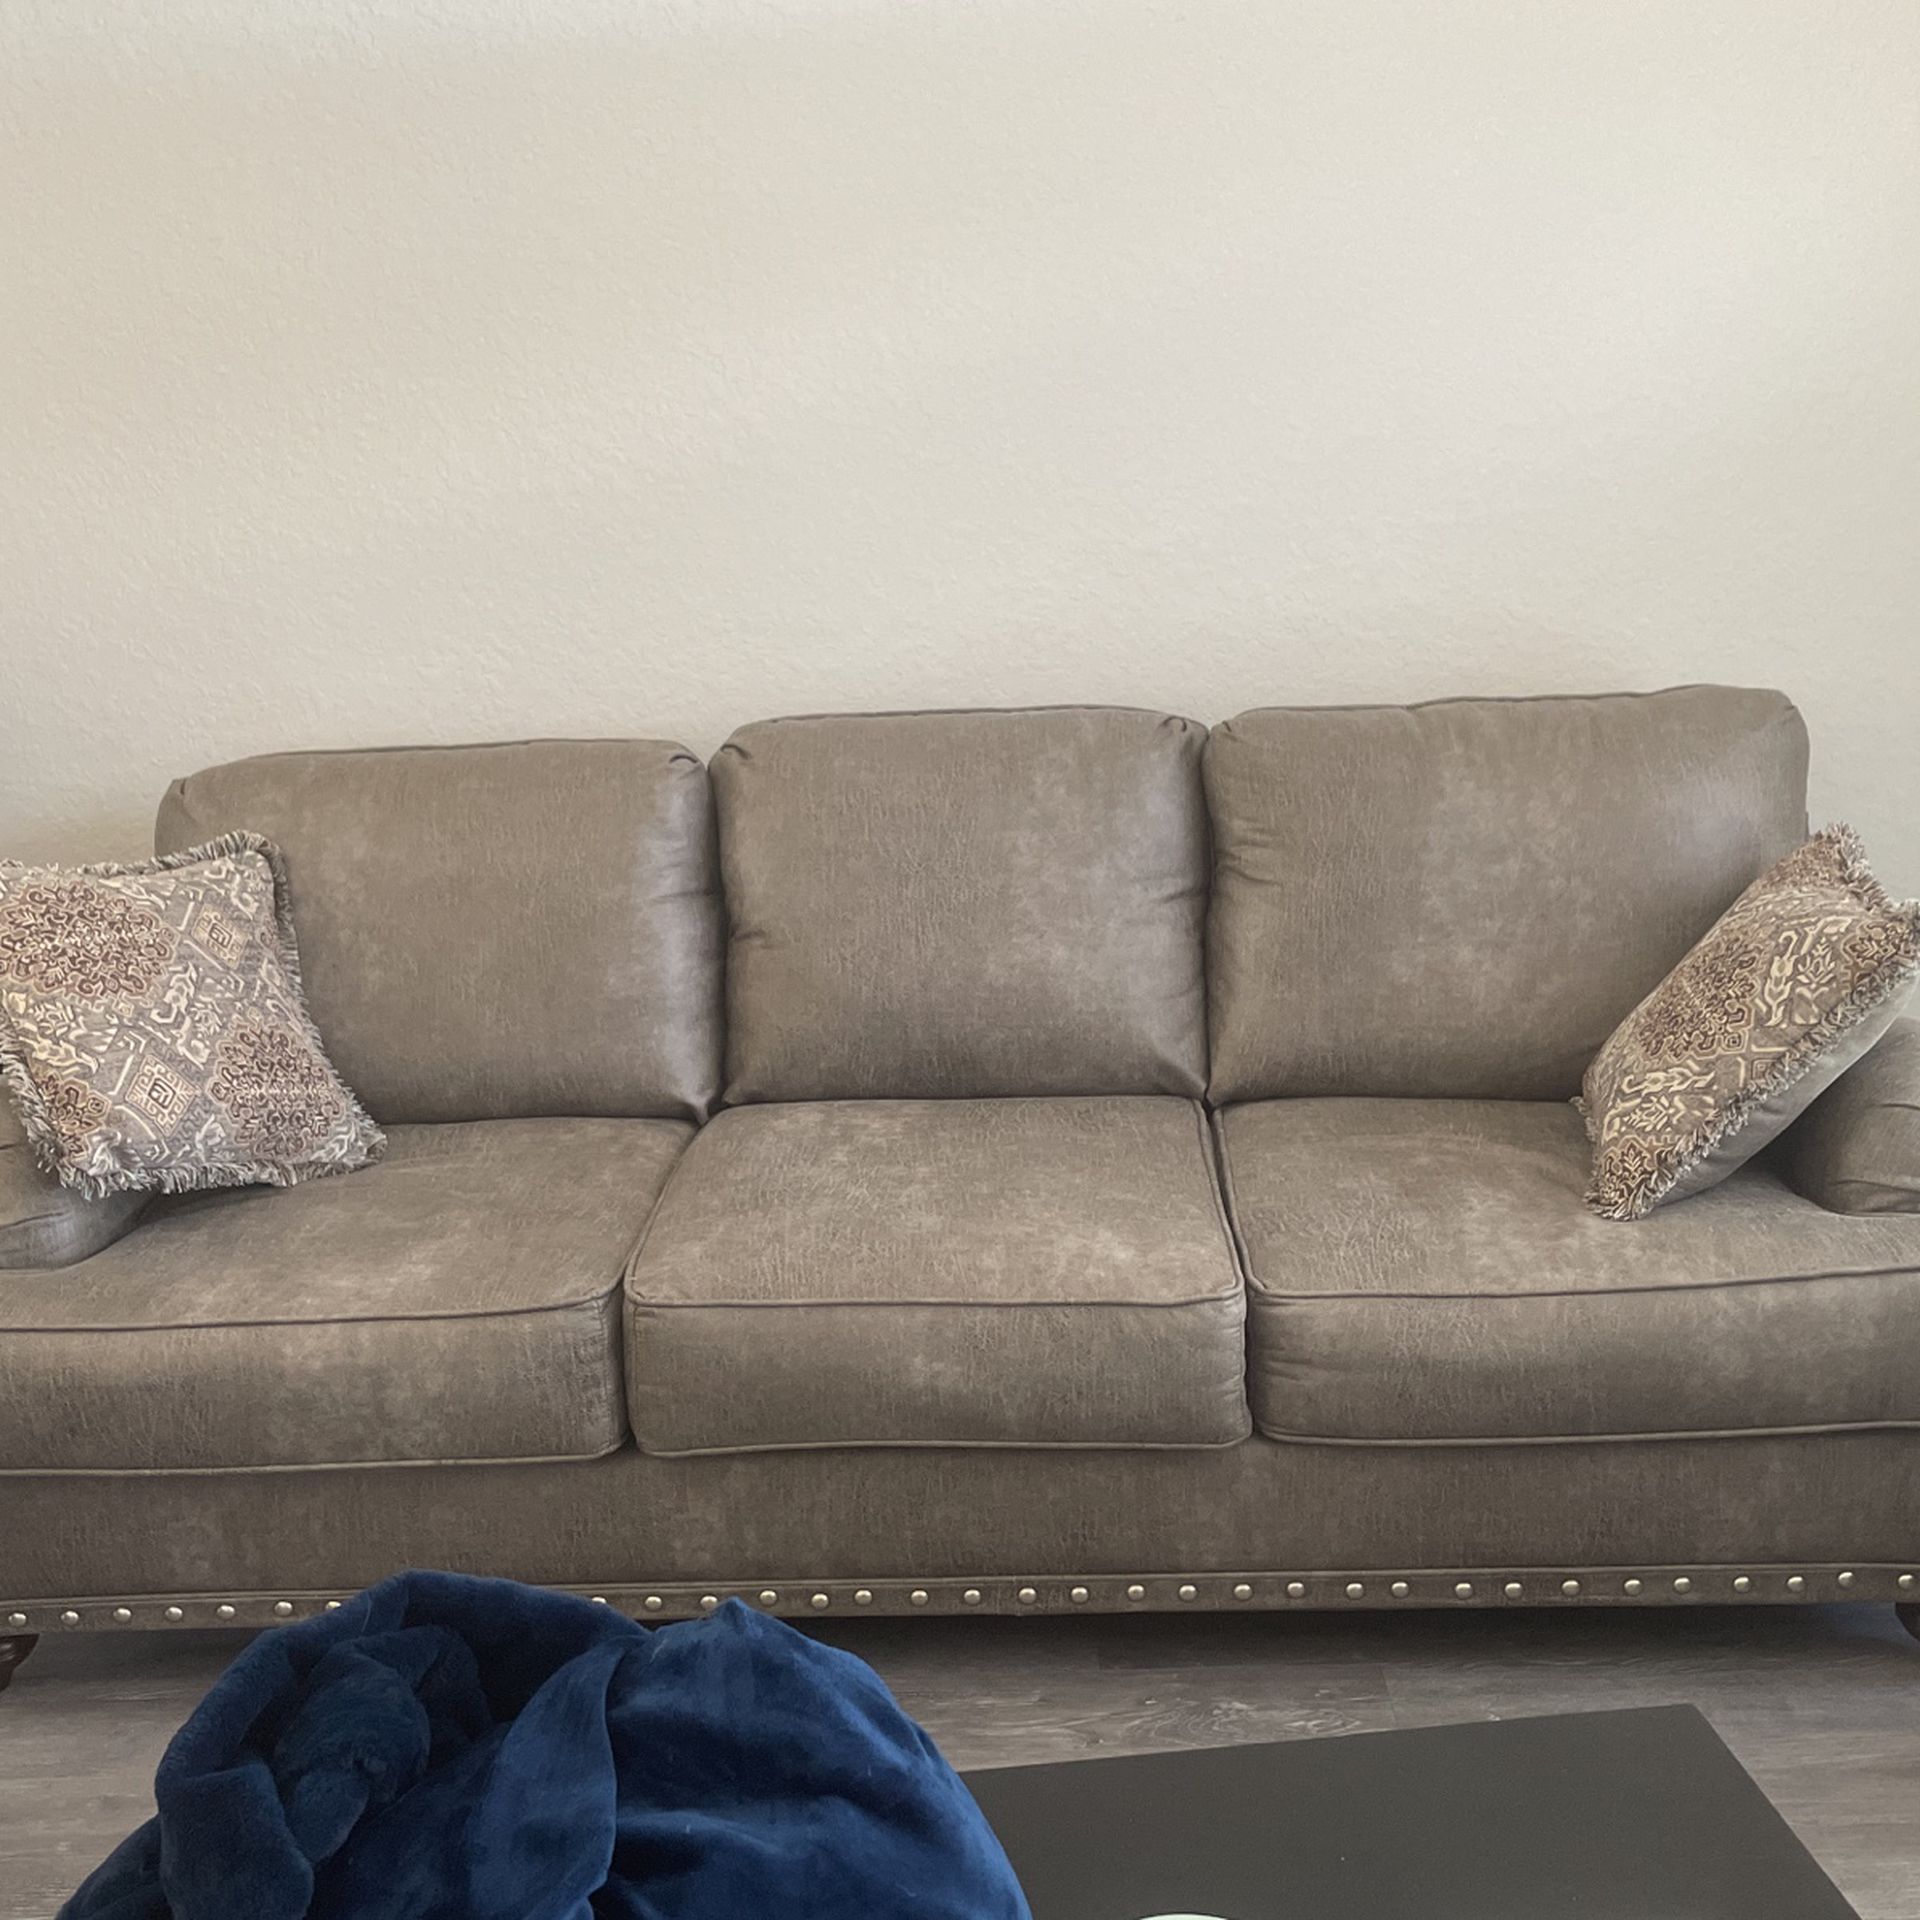 Sofa And Loveseat With Pillows On Both